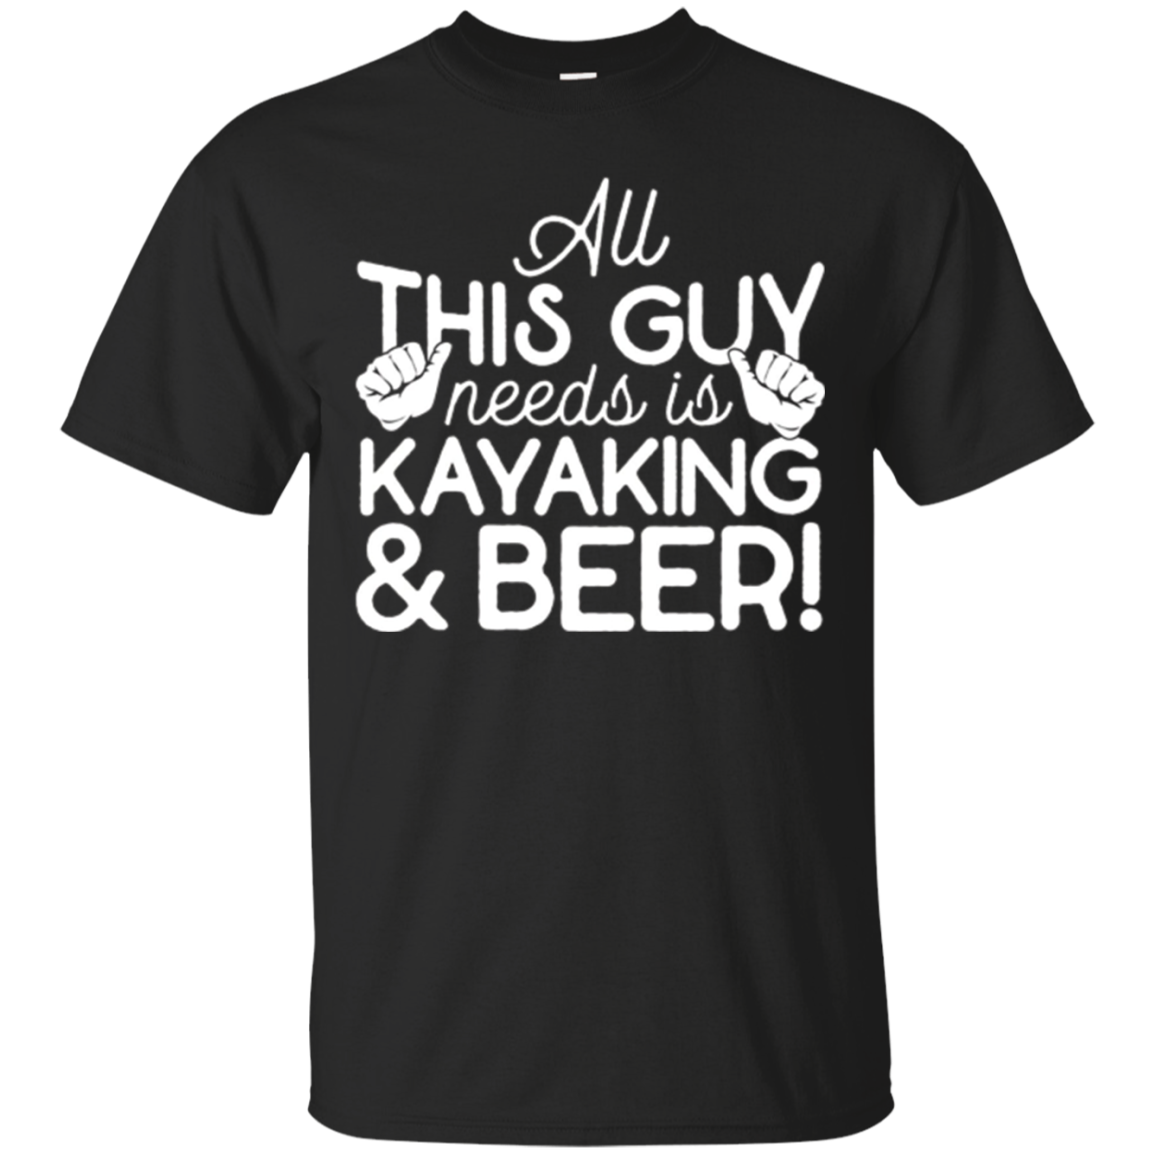 All This Guy Needs Is Kayaking & Beer Funny T Shirt